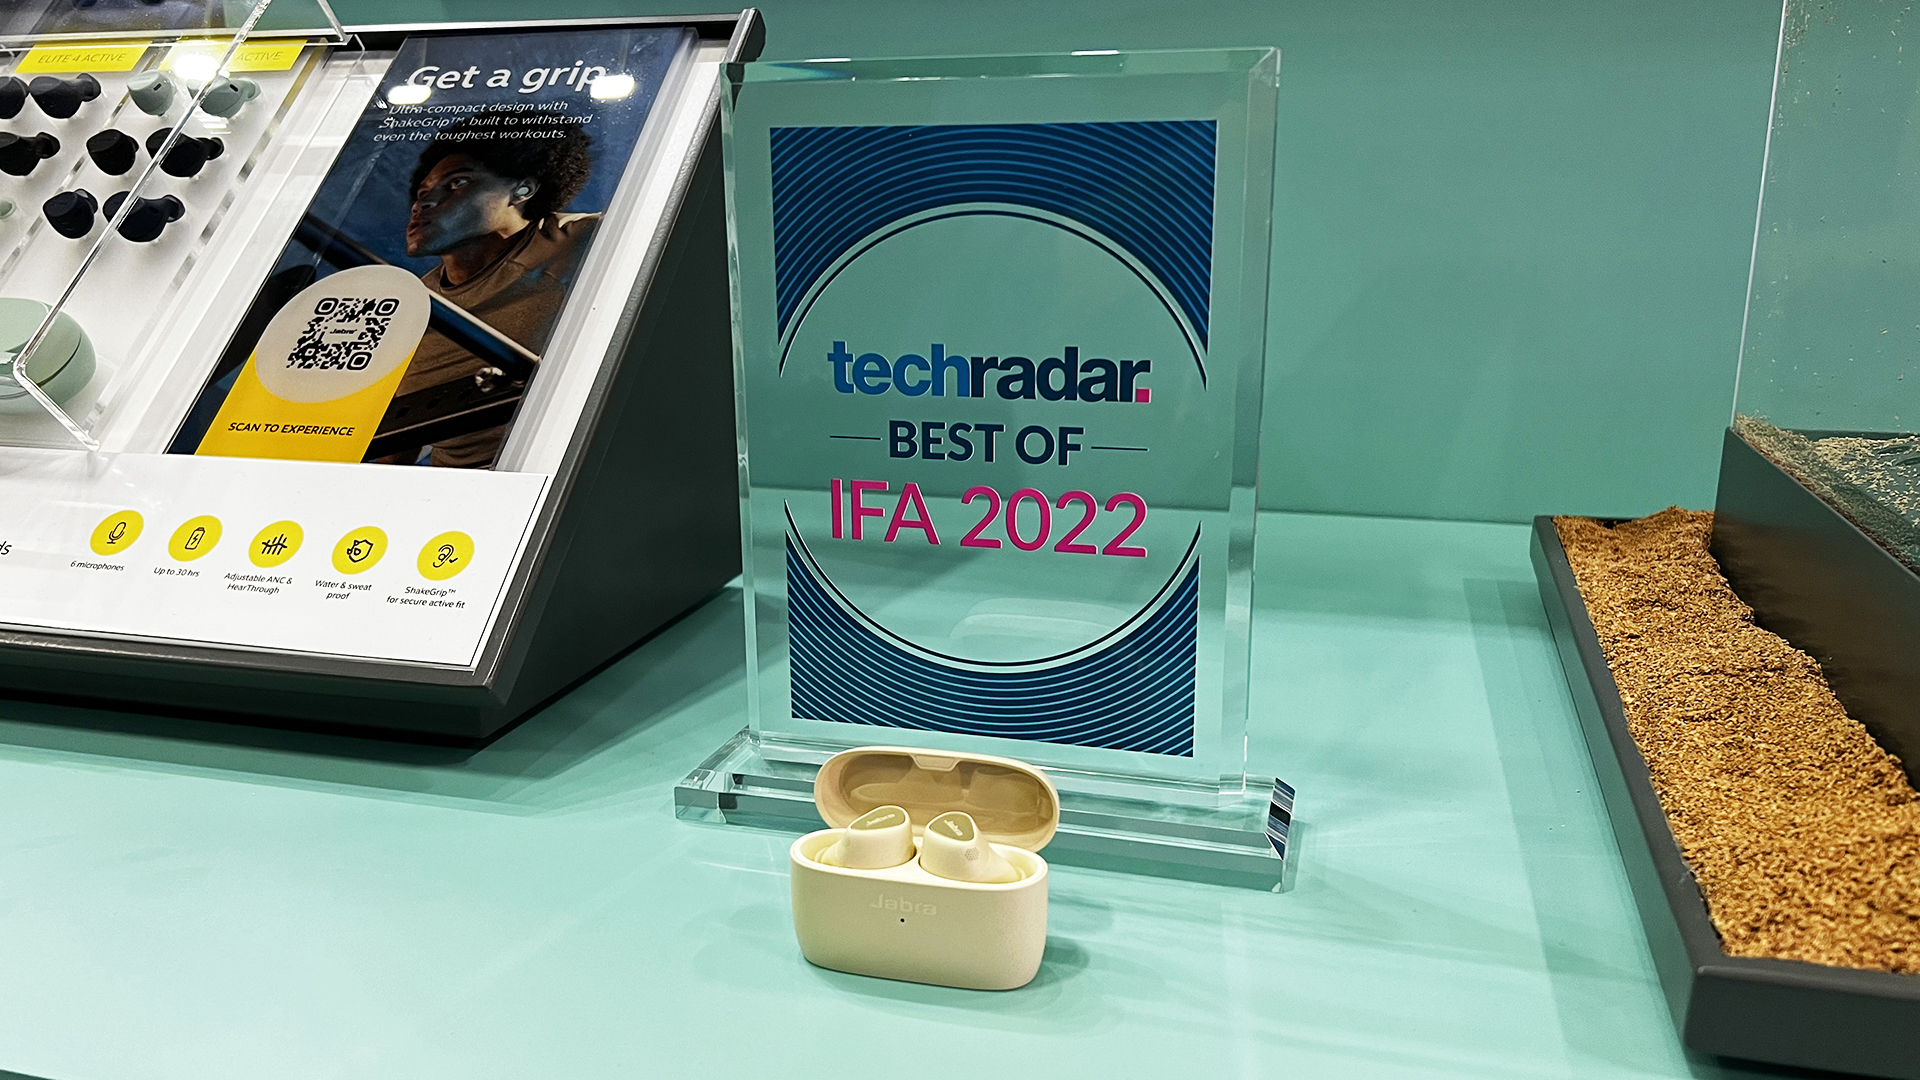 IFA 2022 award with Jabra Elite 5 earbuds in charging case.